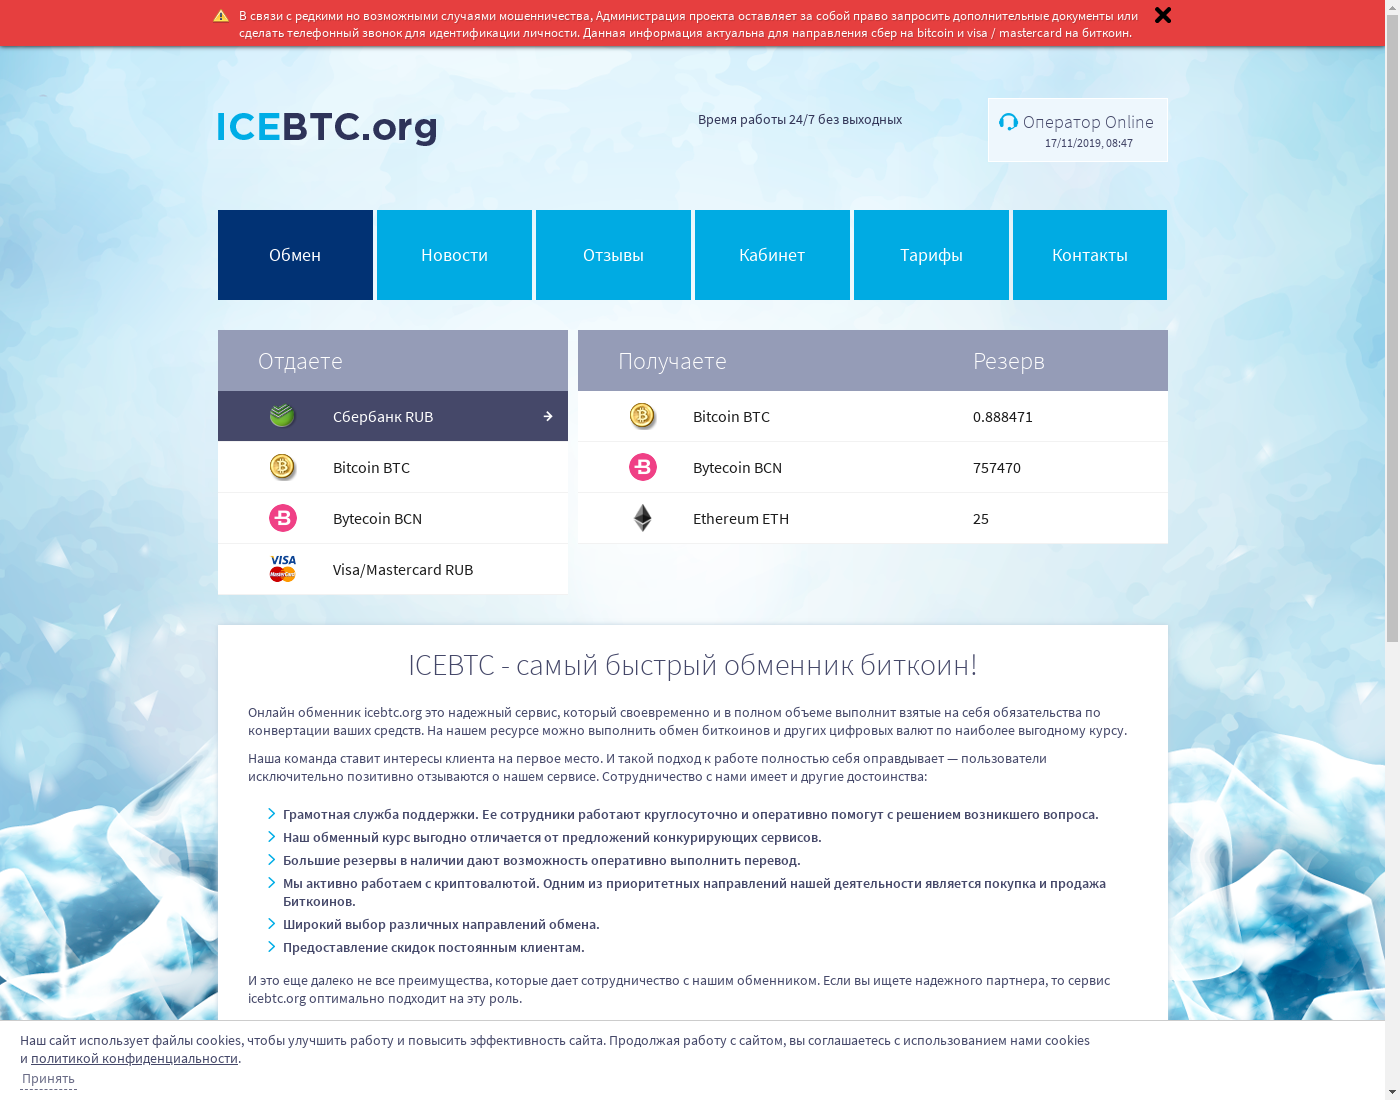 iceBTC user interface: the home page in English